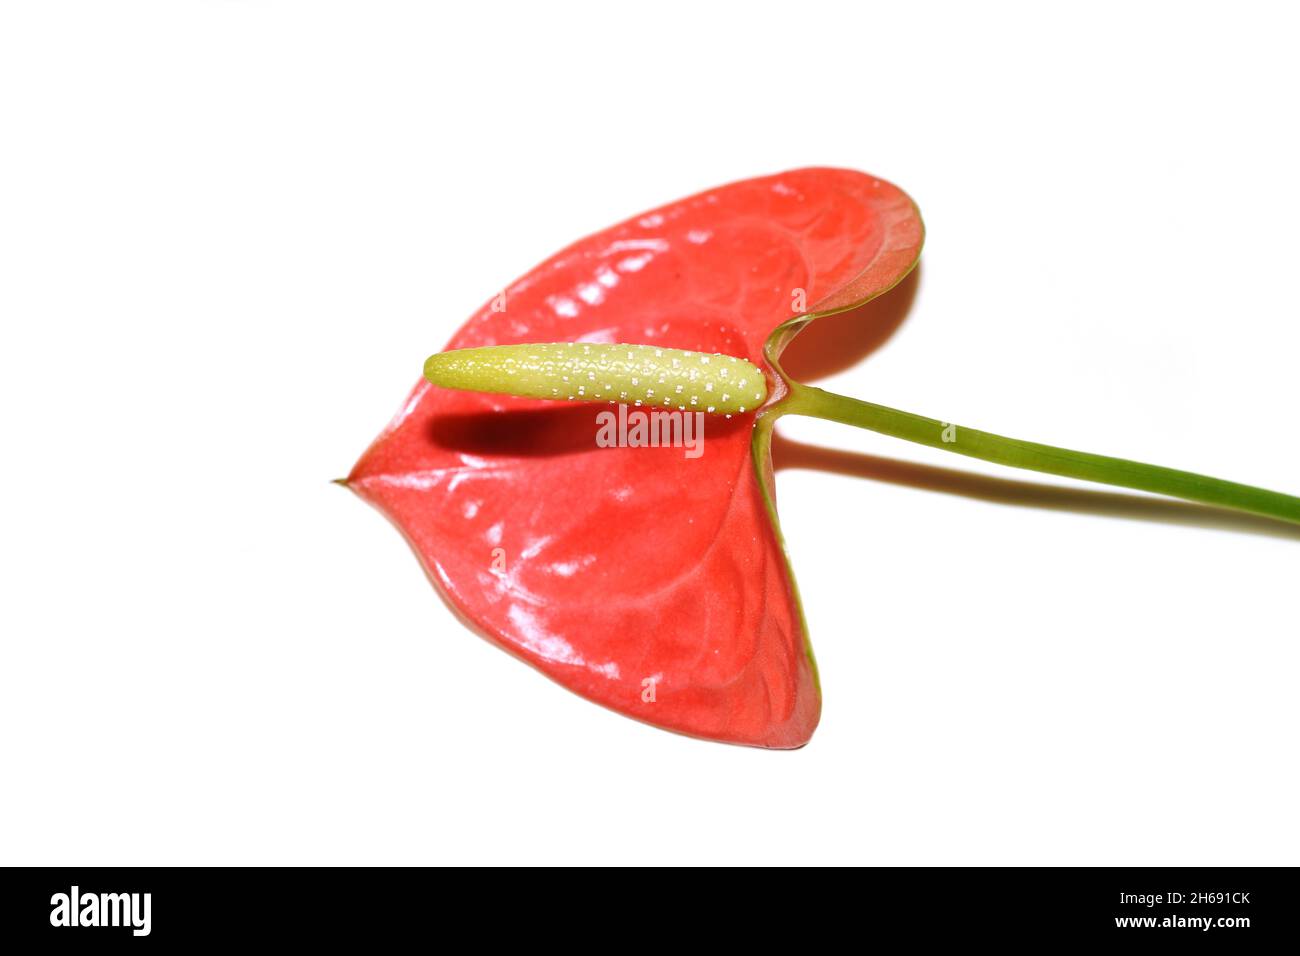 Red leaf and flower from flamingo flower Anthurium sp. isolated on white background Stock Photo